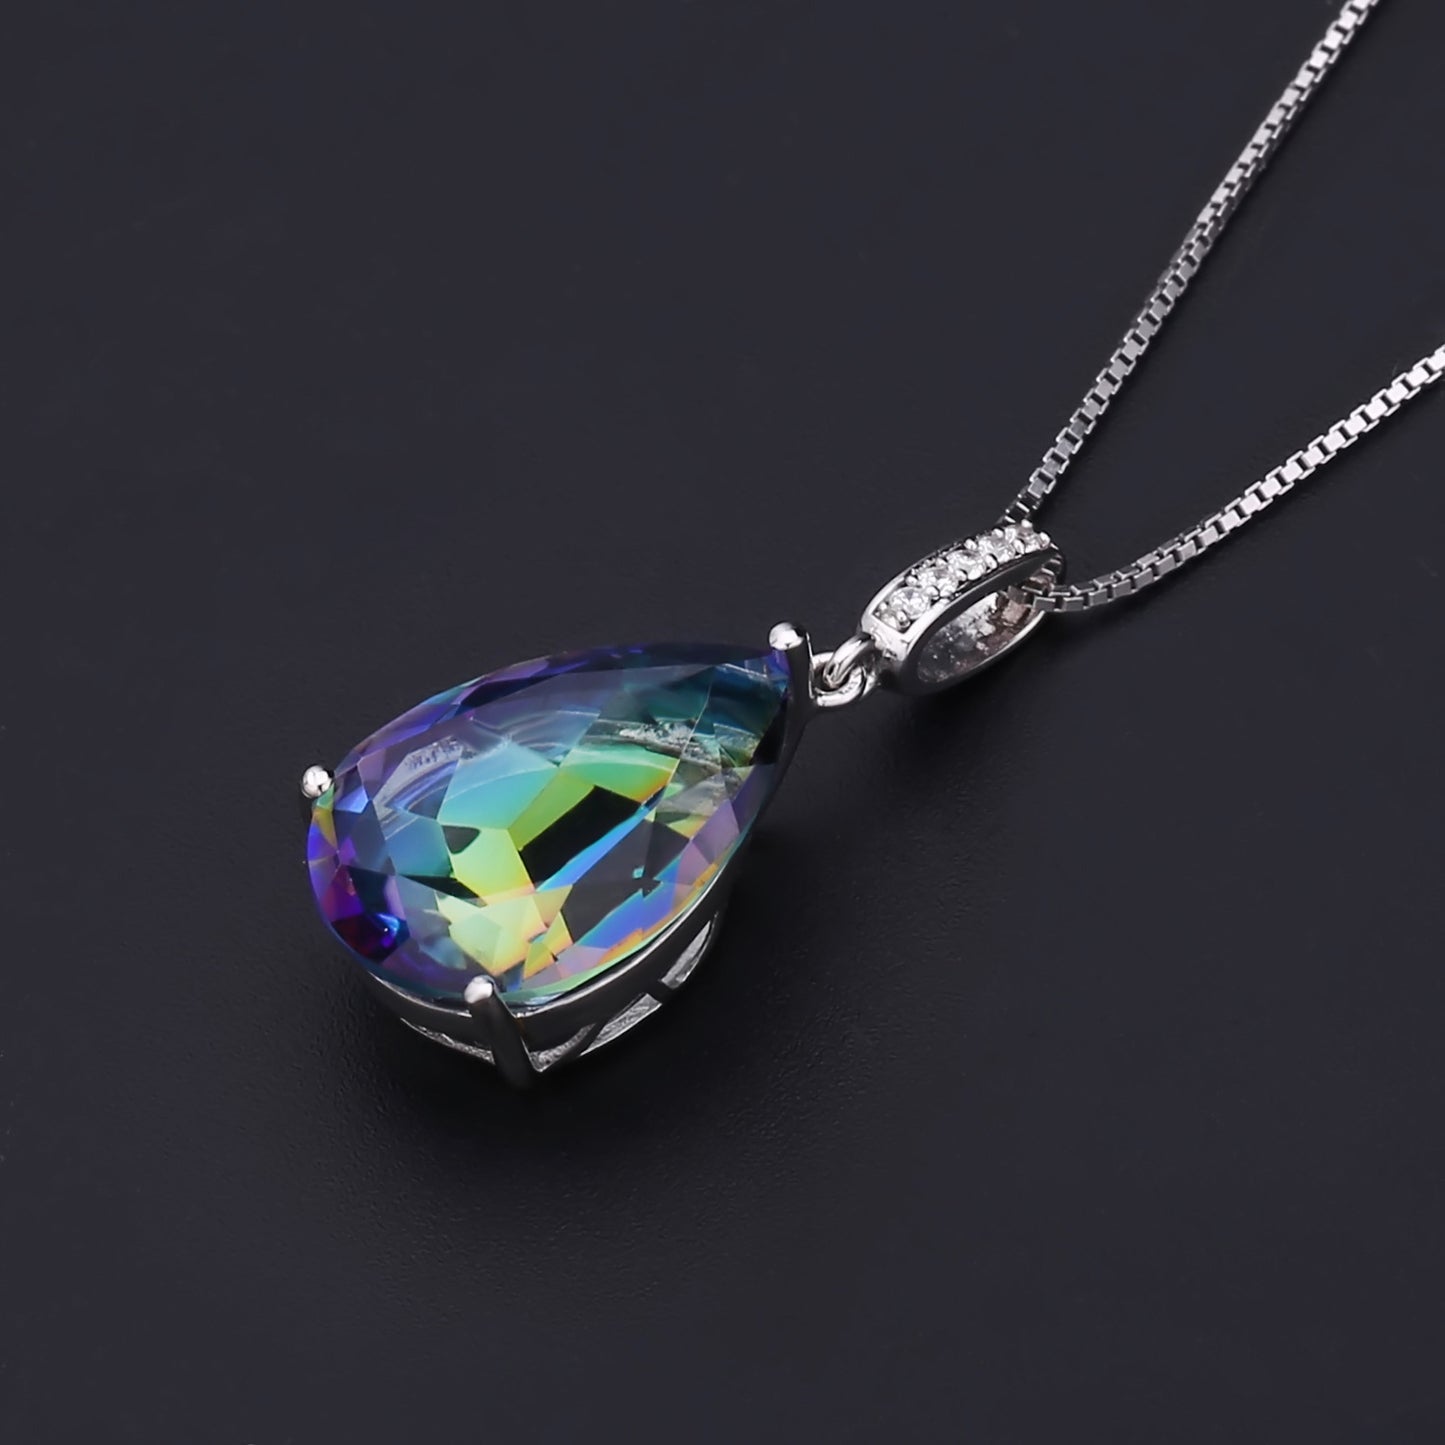 European Style Inlaid Natural Crystal Three Prongs Pear Drop Pendants Silver Necklace for Women